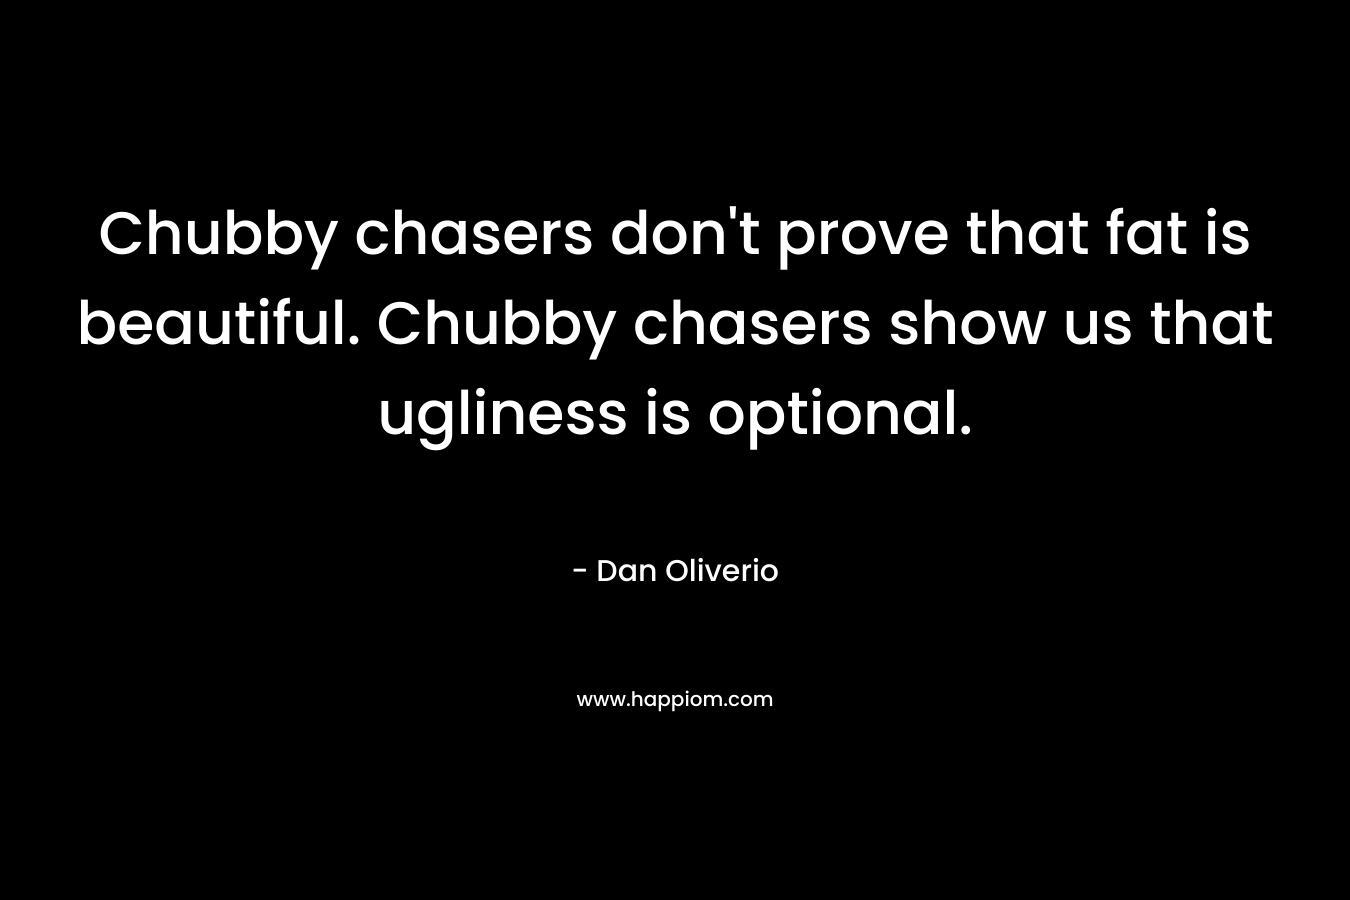 Chubby chasers don't prove that fat is beautiful. Chubby chasers show us that ugliness is optional.